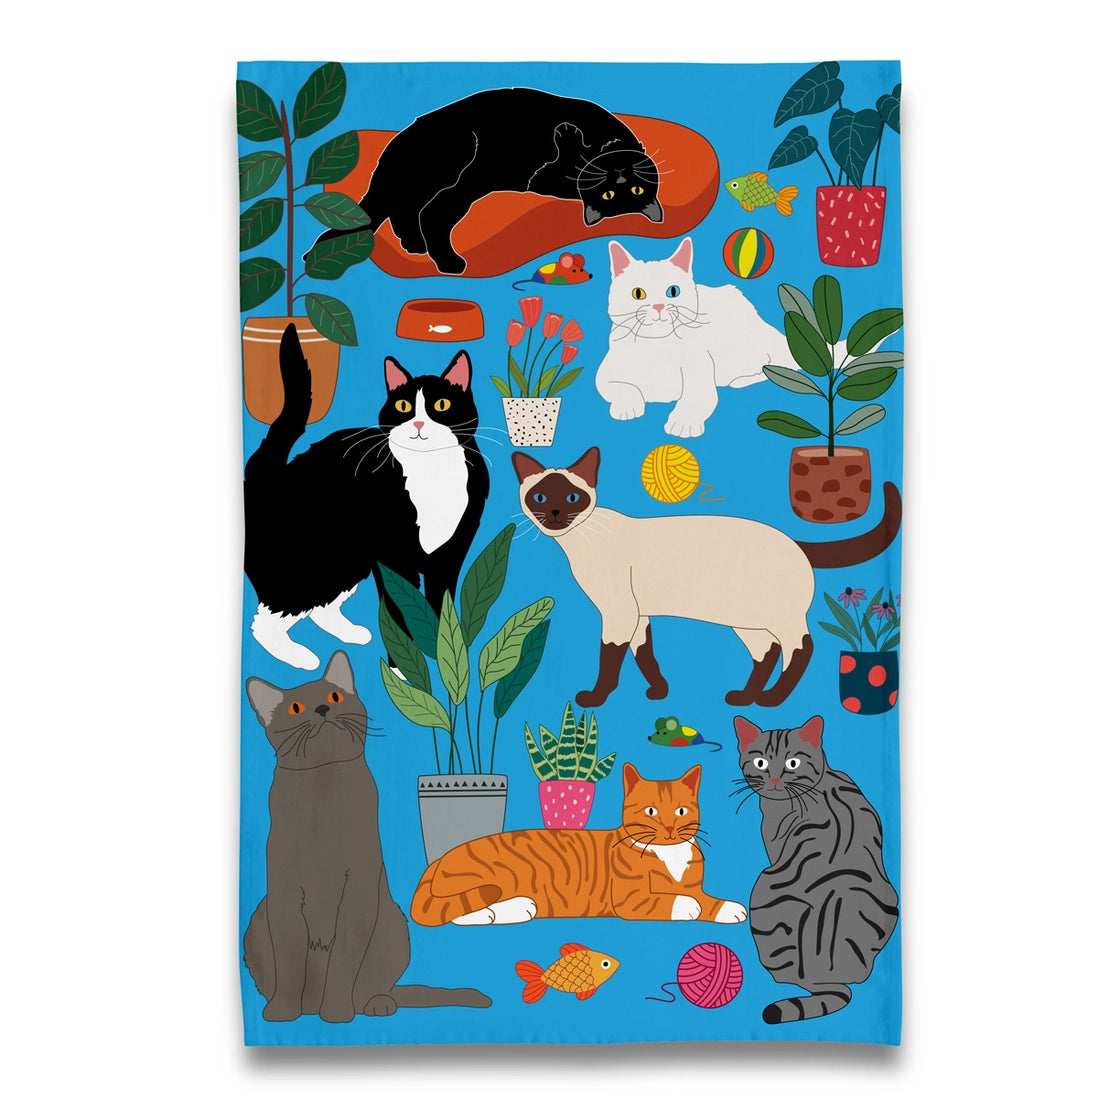 At Home with Kitty Cats - Tea Towel